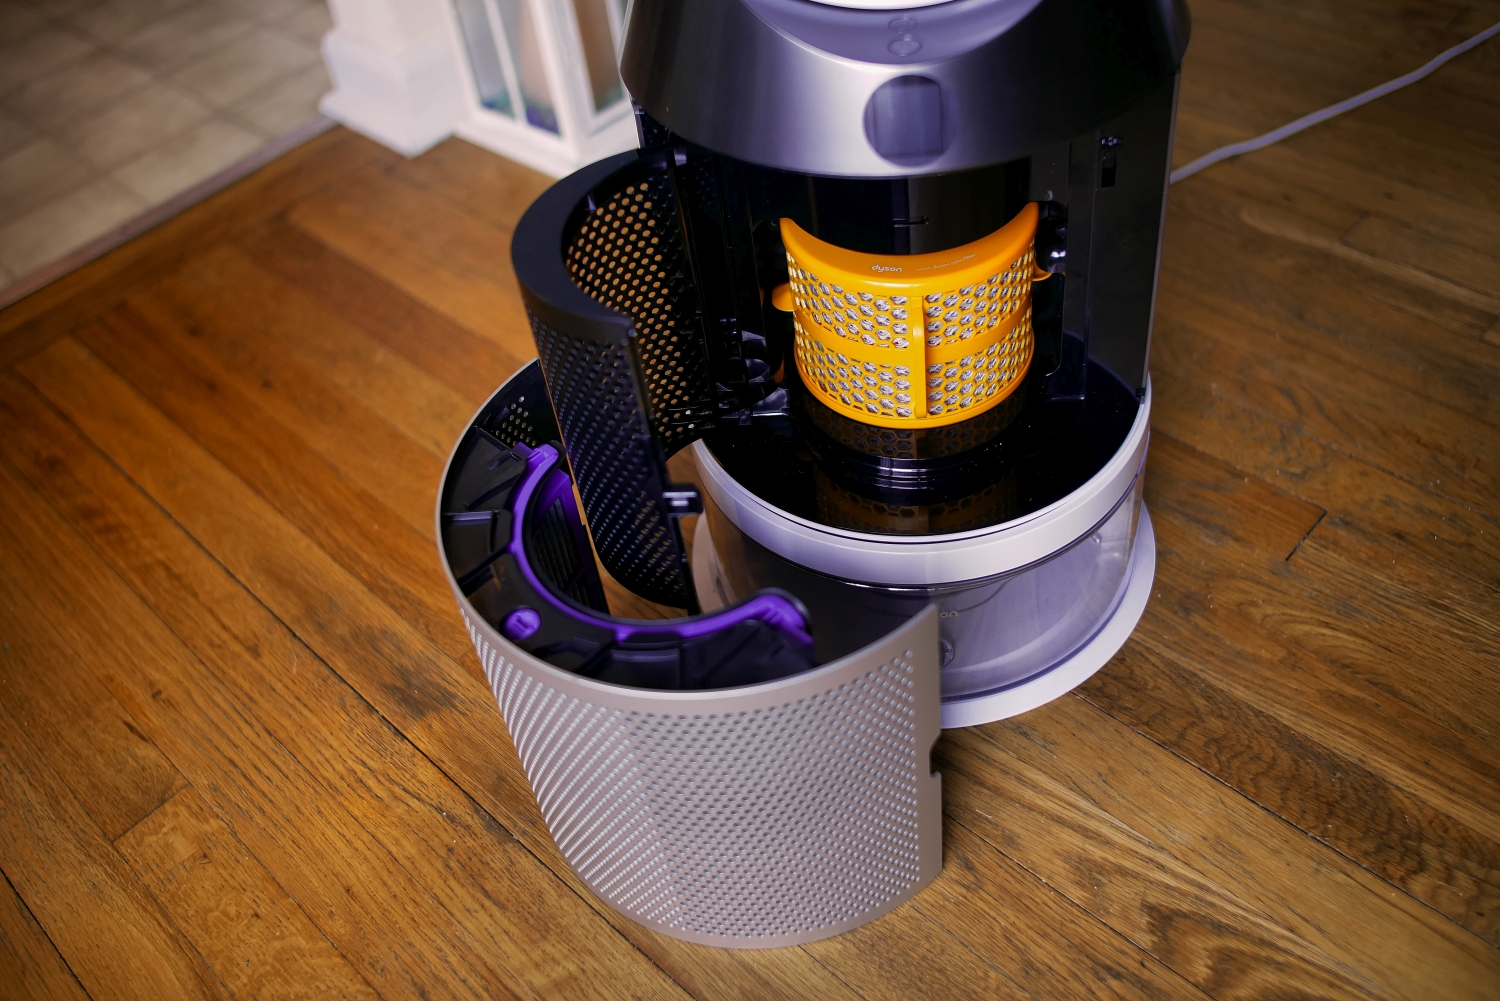 Review: Dyson Humidifier with ultraviolet cleanse technology